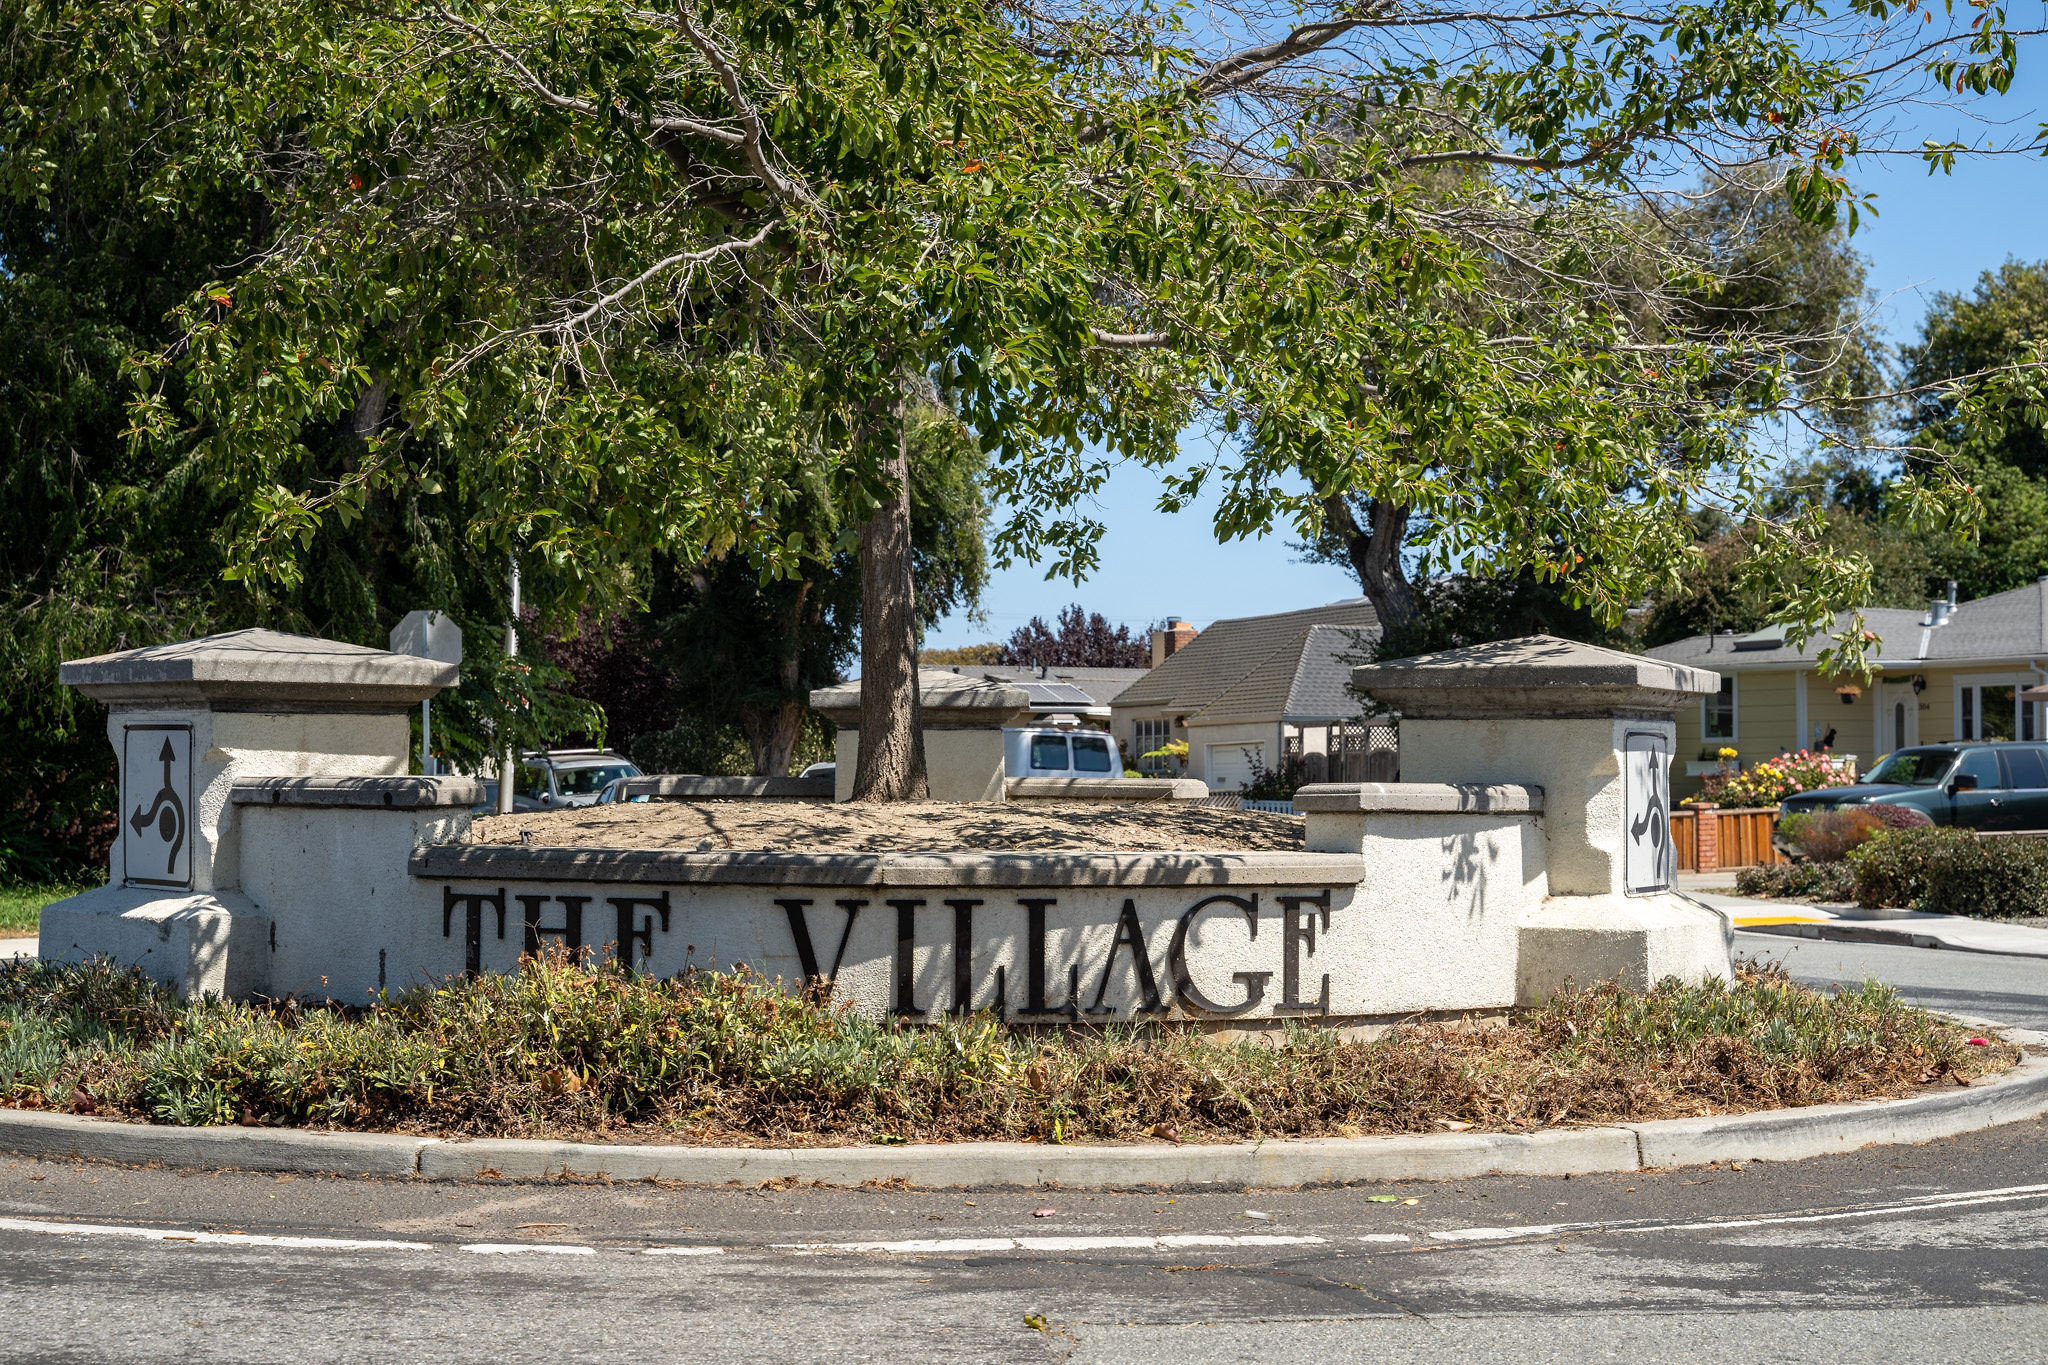 Welcoming sign at the entrance of The Village area in San Mateo